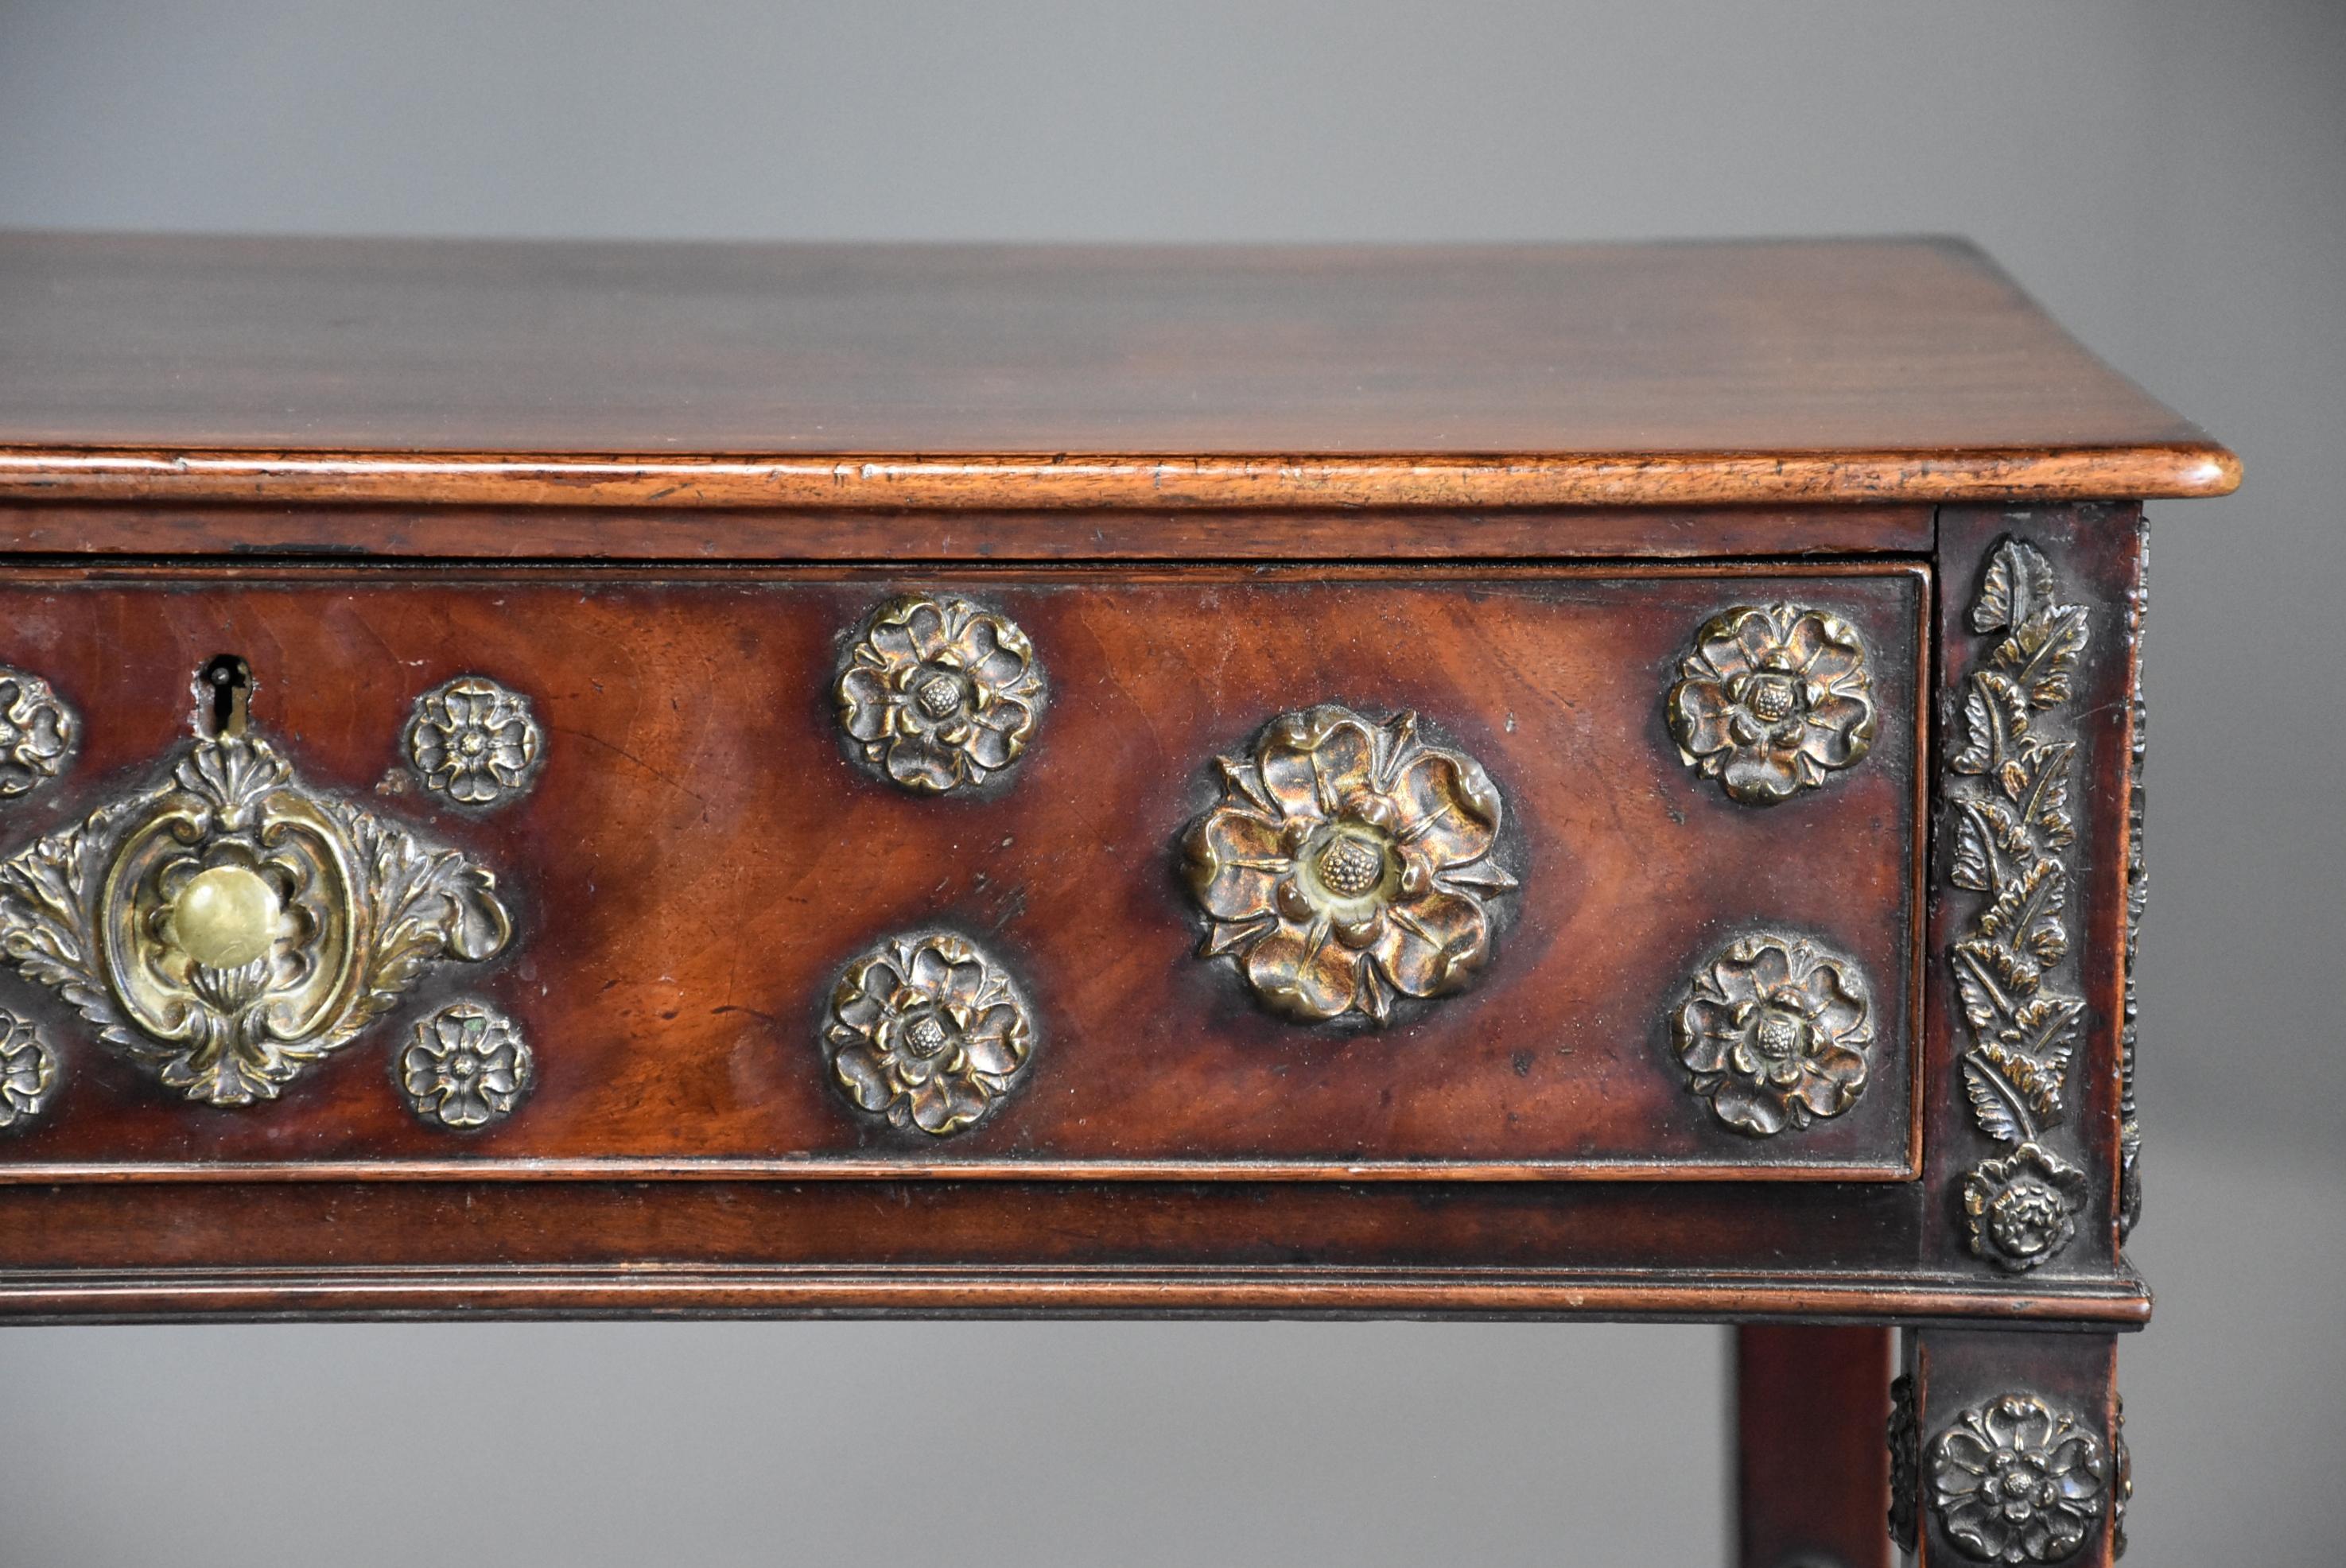 Decorative Late 18th Century Mahogany Side Table with Later Applied Brass Mounts 6